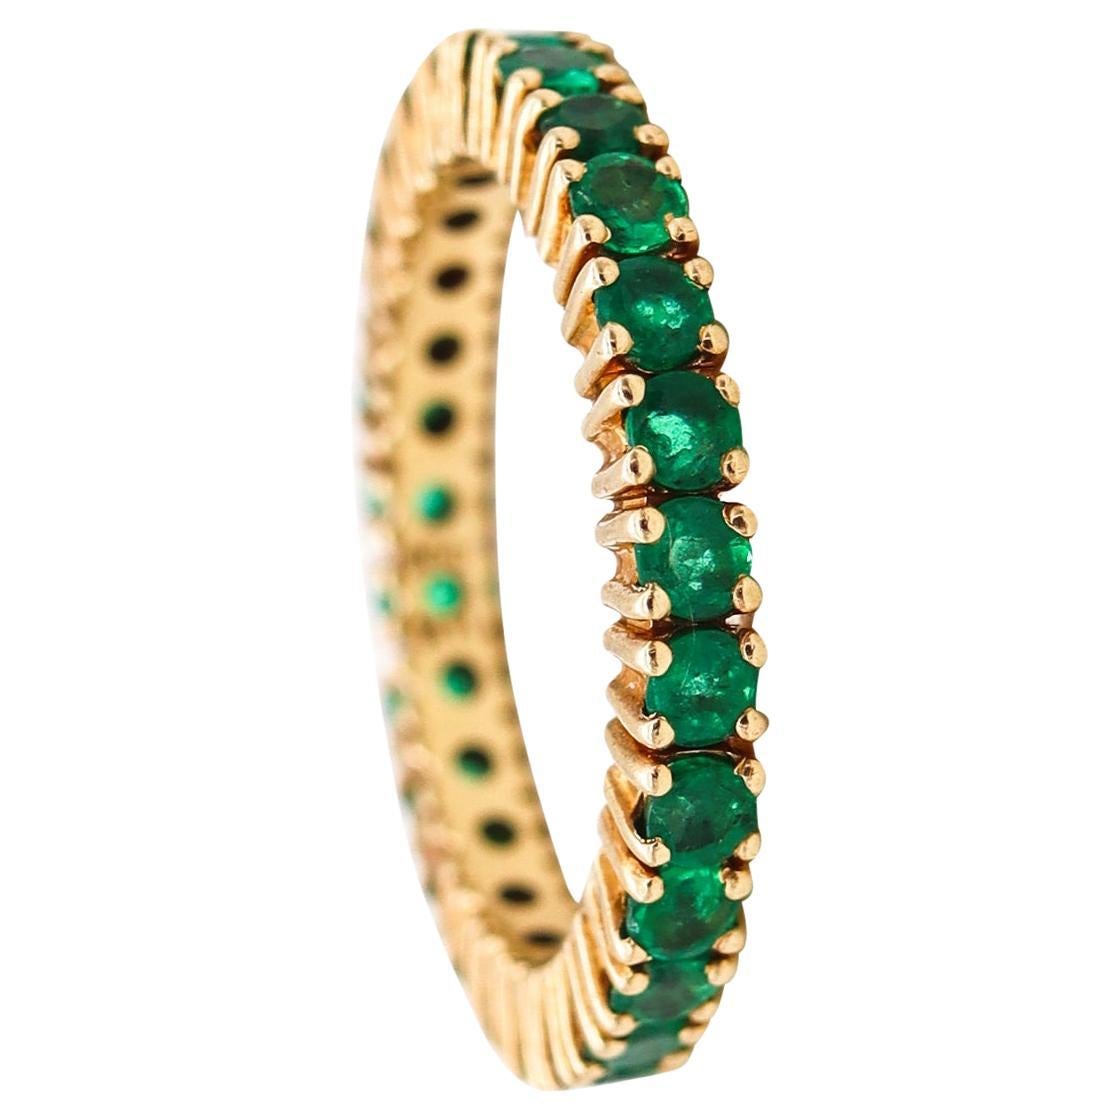 Eternity Ring Band in 14Kt Yellow Gold with 1.62 Carats of Colombian Emeralds